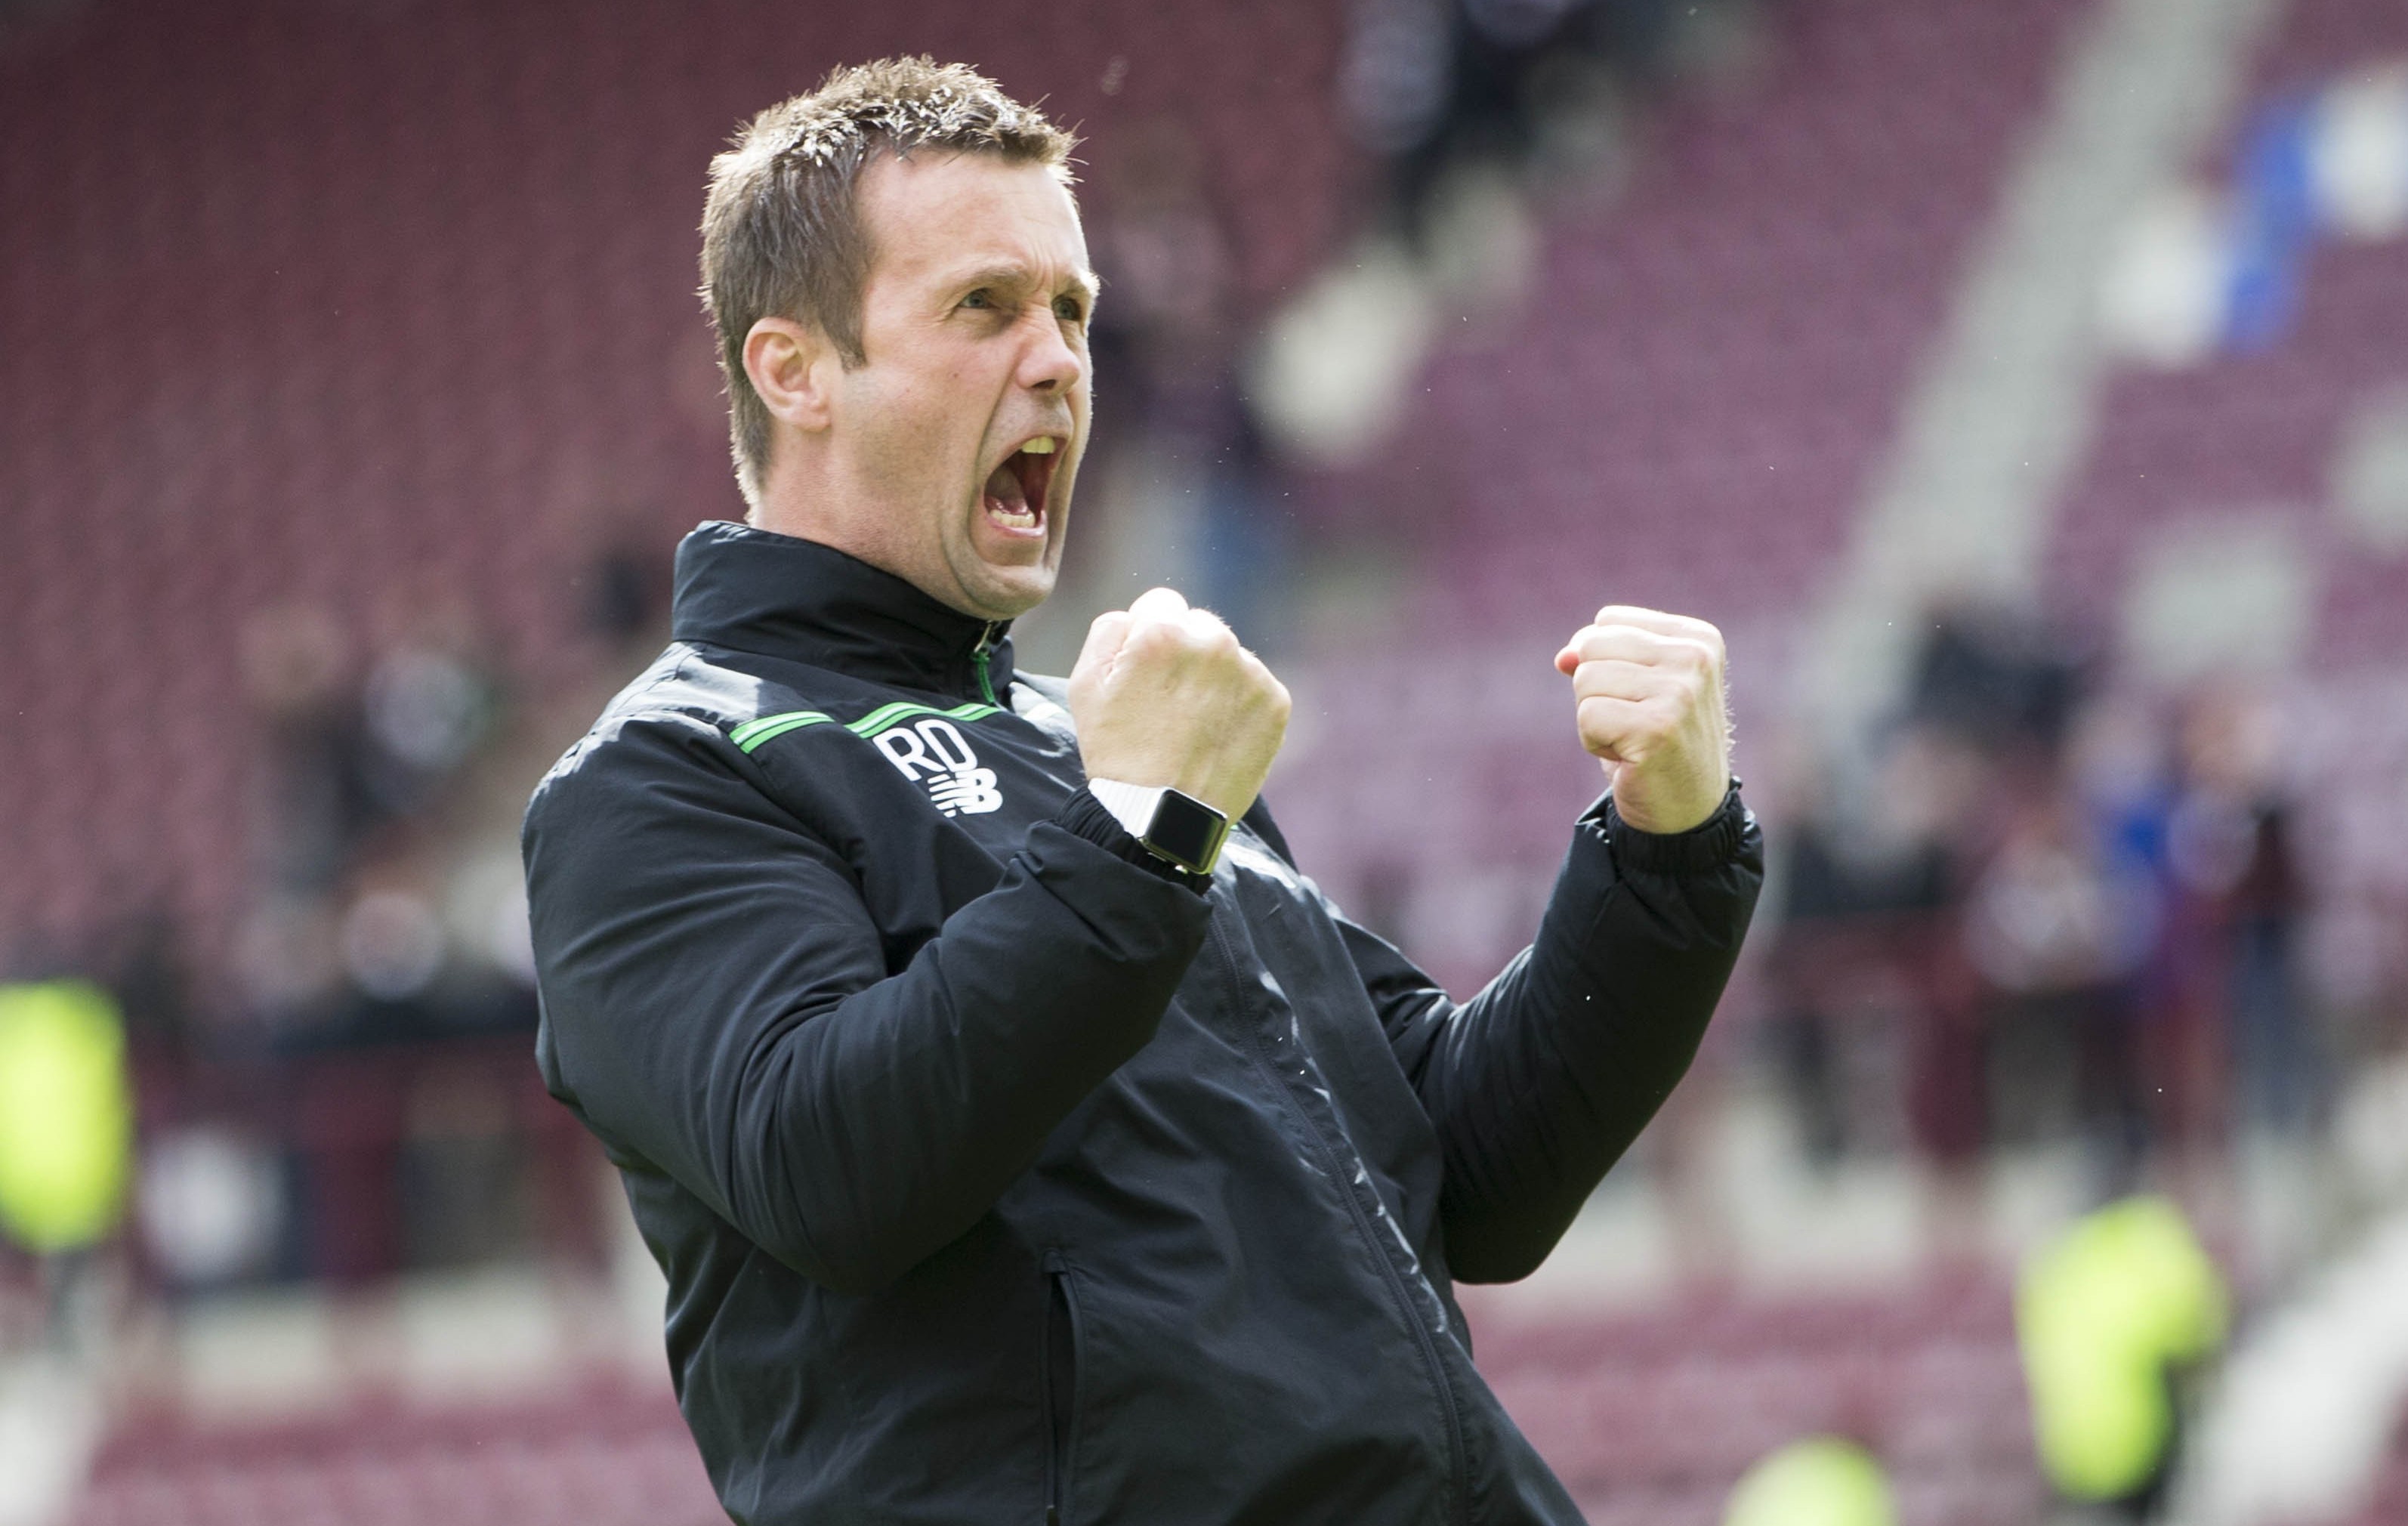 Celtic manager Ronny Deila celebrates at the final whistle (Jeff Holmes/PA Wire)